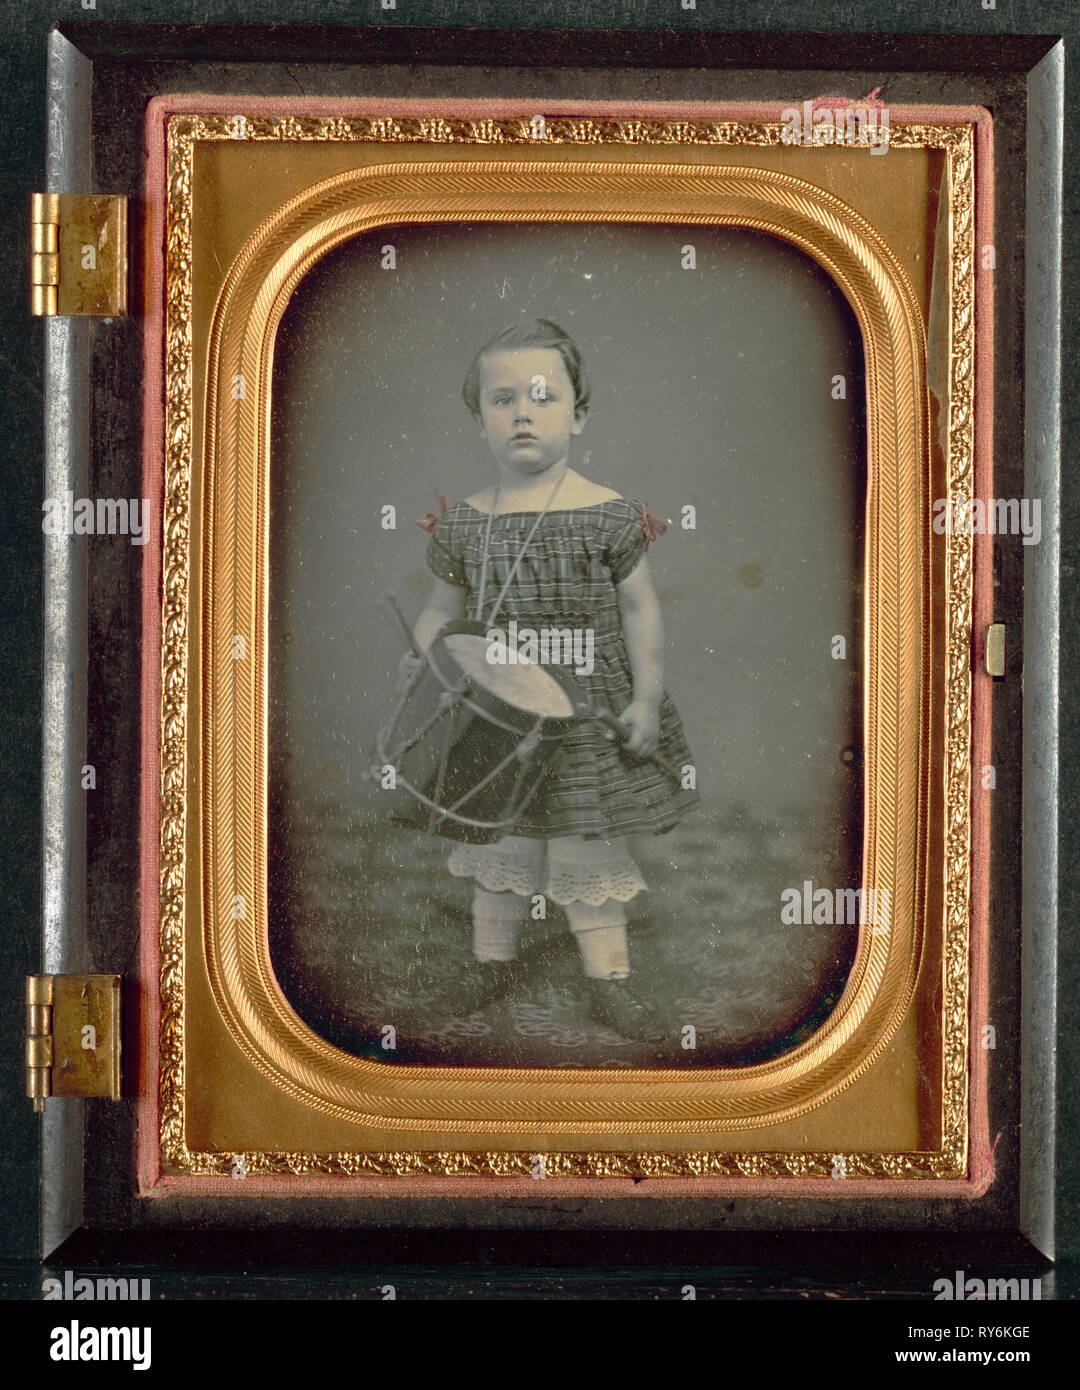 Child with Drum, 1850s. Unidentified Photographer. Daguerreotype, quarter-plate; image: 8.3 x 7 cm (3 1/4 x 2 3/4 in.); case: 12.7 x 10.5 cm (5 x 4 1/8 in.); matted: 61 x 50.8 cm (24 x 20 in Stock Photo